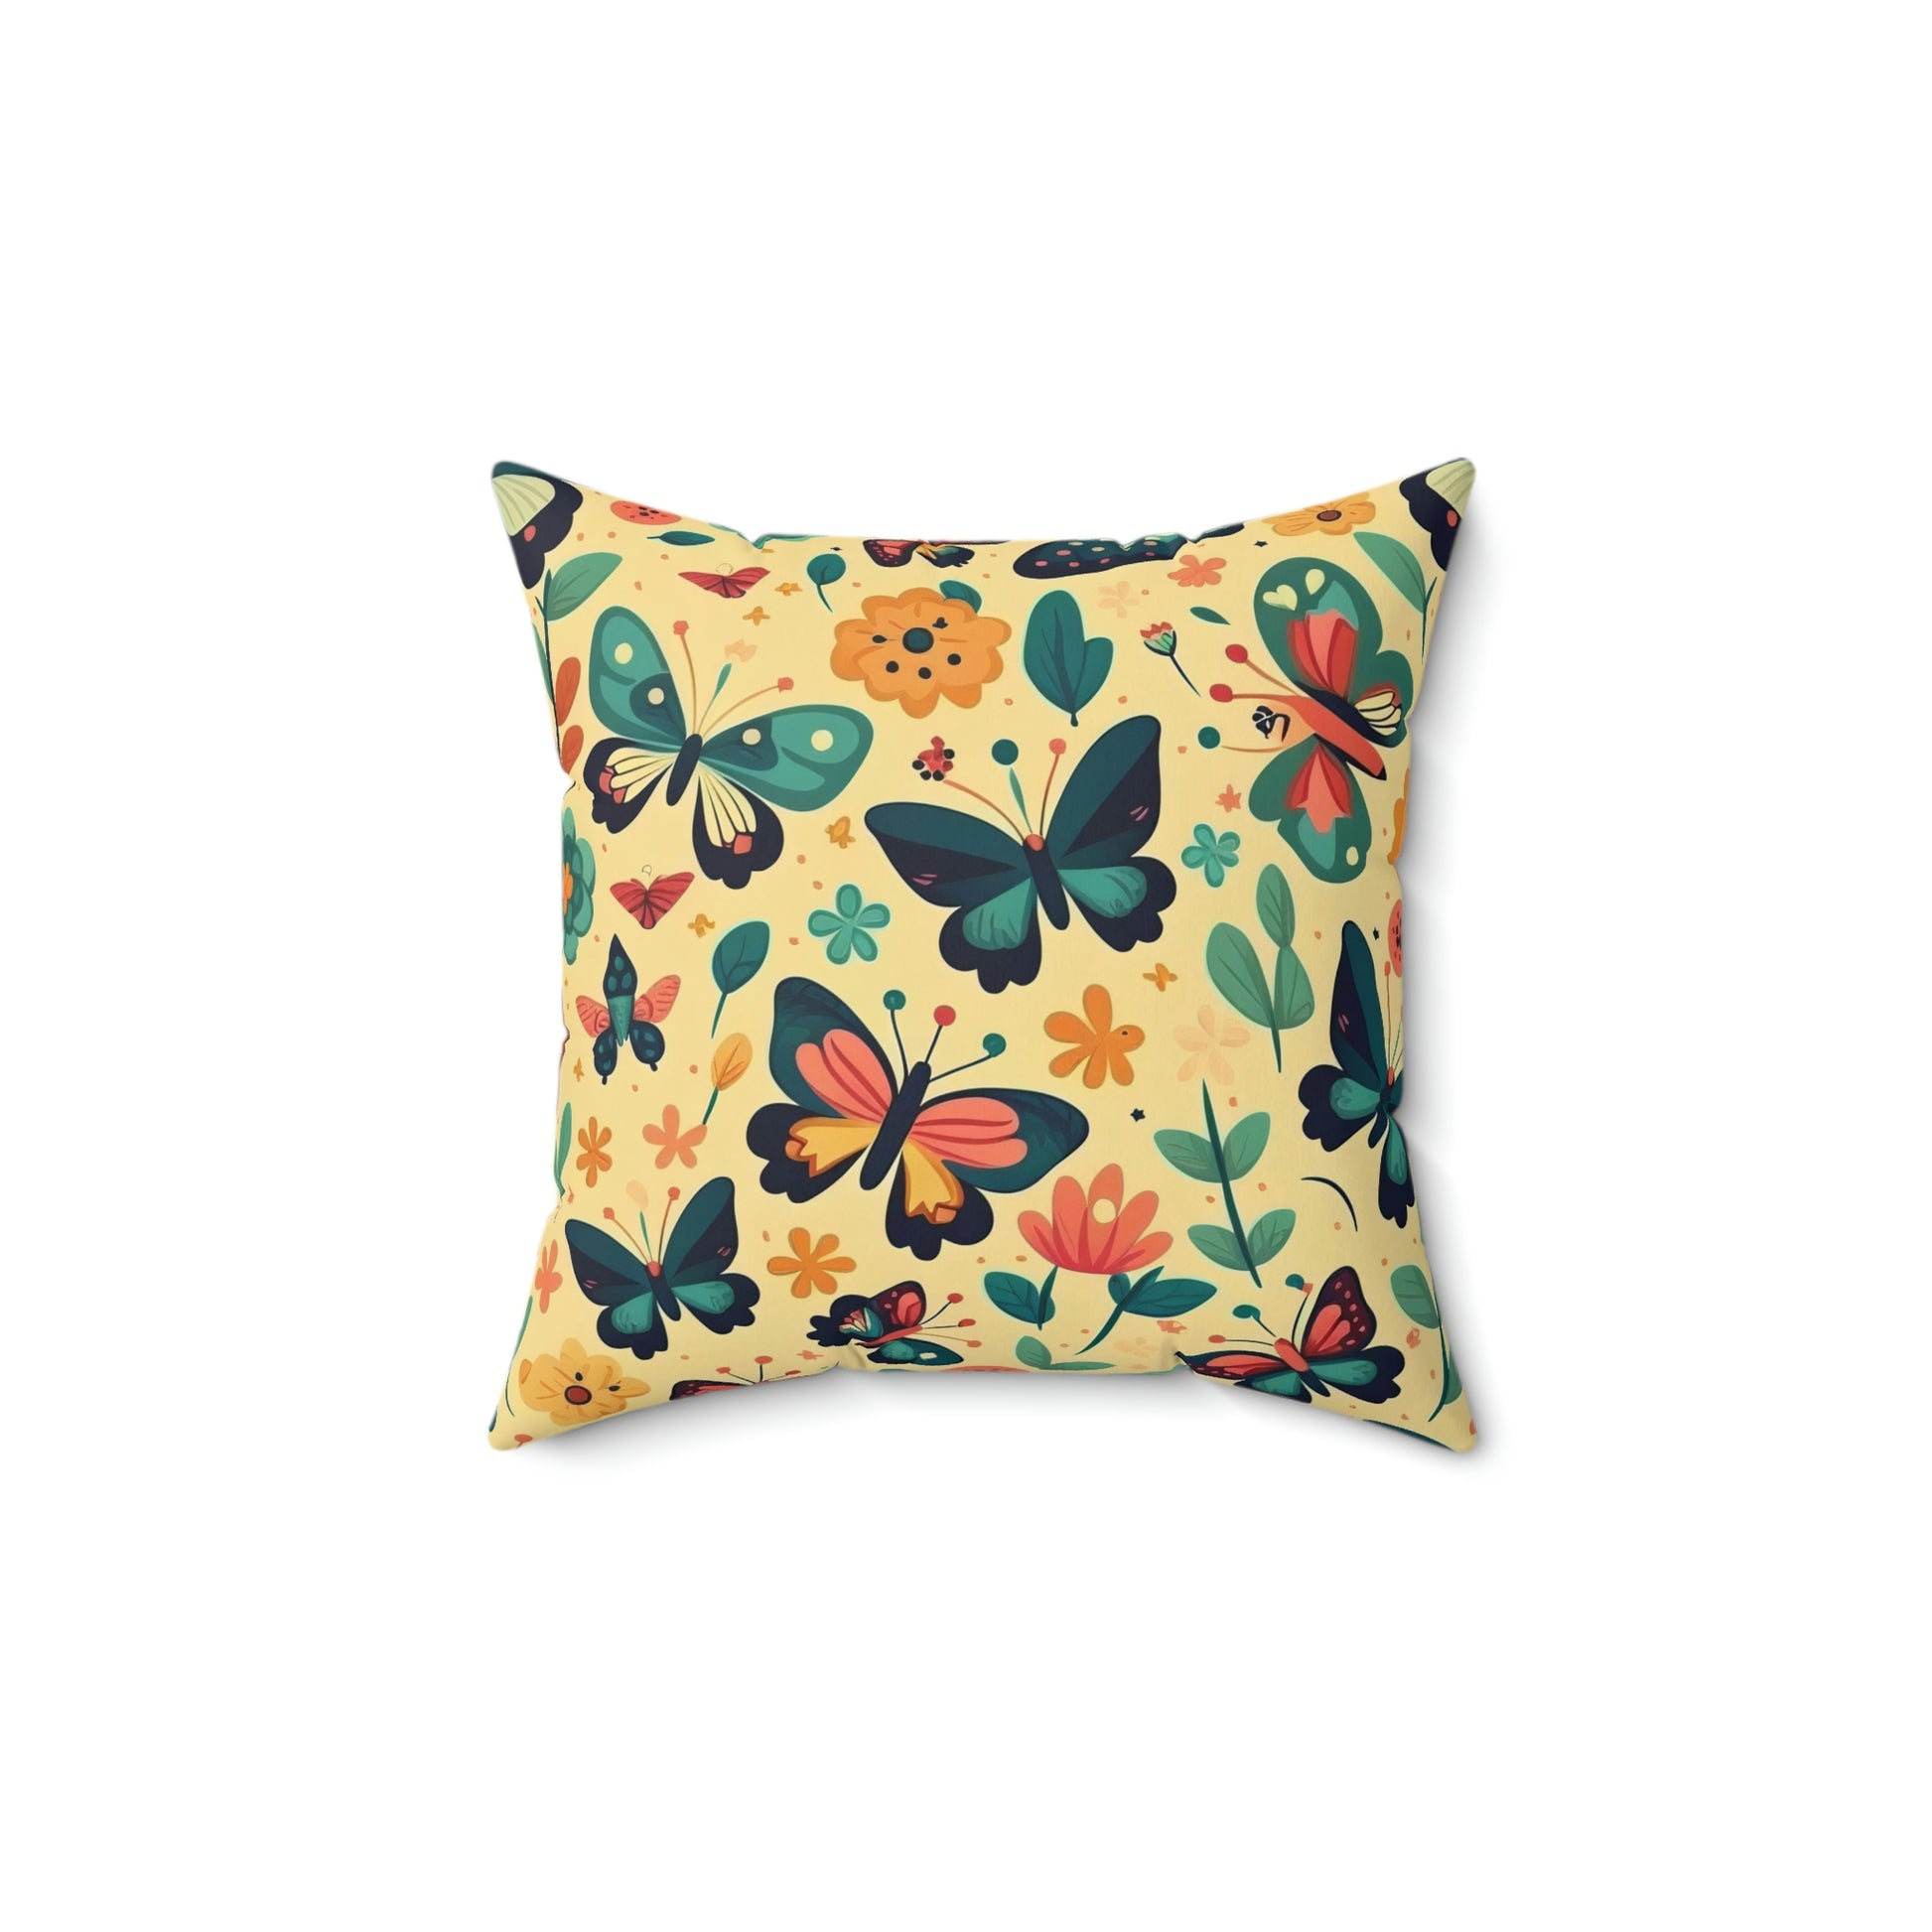 Butterfly Blue and Yellow floral accent throw pillow on a couch, Butterfly Blue and Yellow botanical couch pillow on a chair, Butterfly Blue and Yellow floral pattern pillow on a lounger, Butterfly Blue and Yellow spring garden floral decorative pillow on a bed